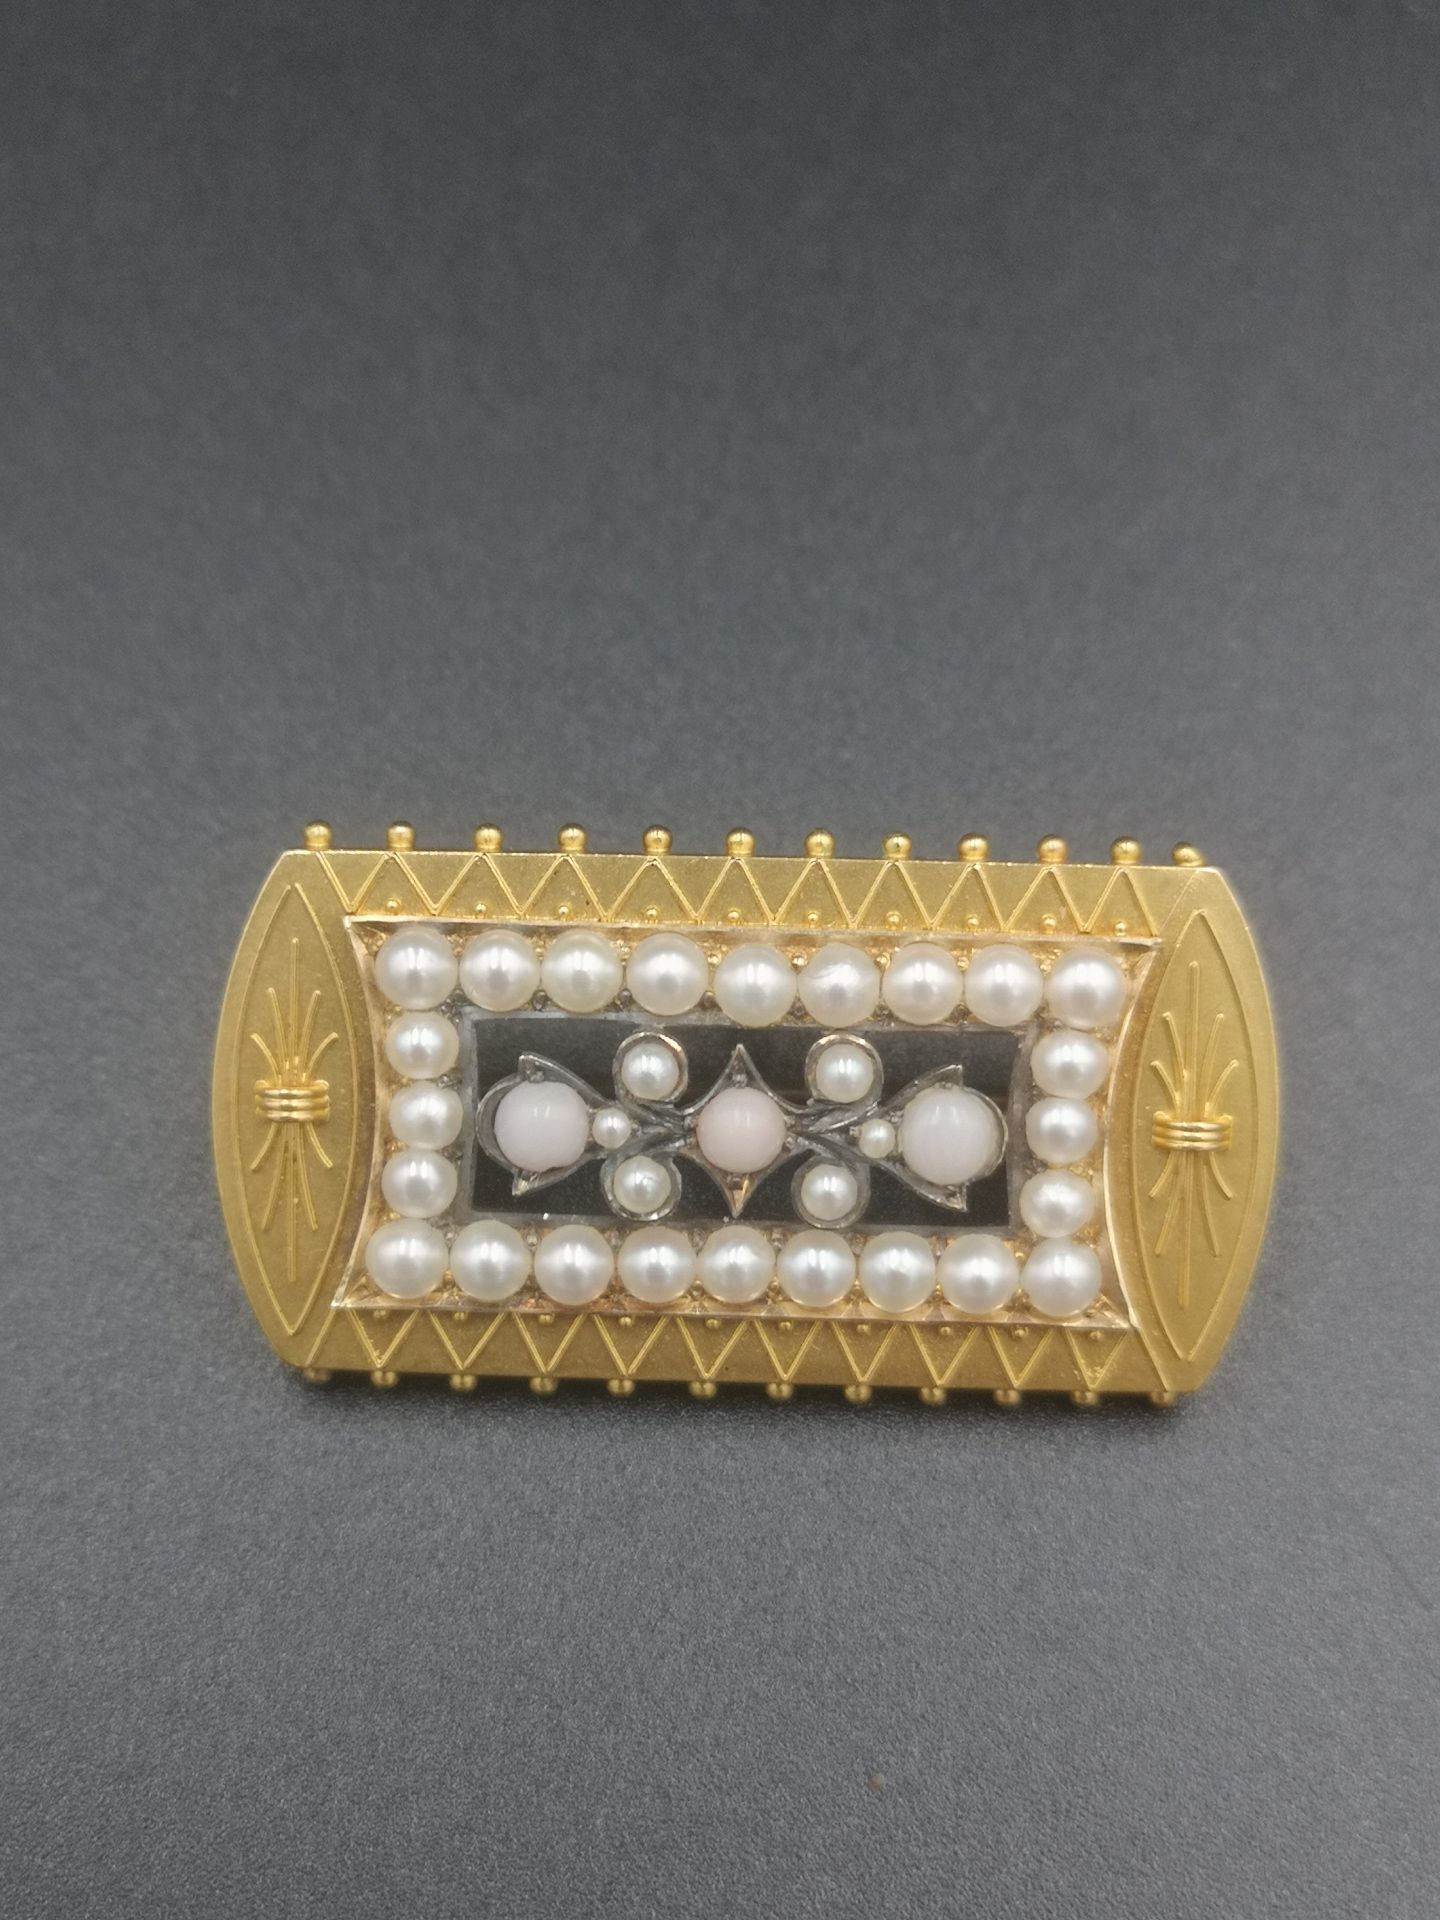 18ct gold Victorian Etruscan revival brooch